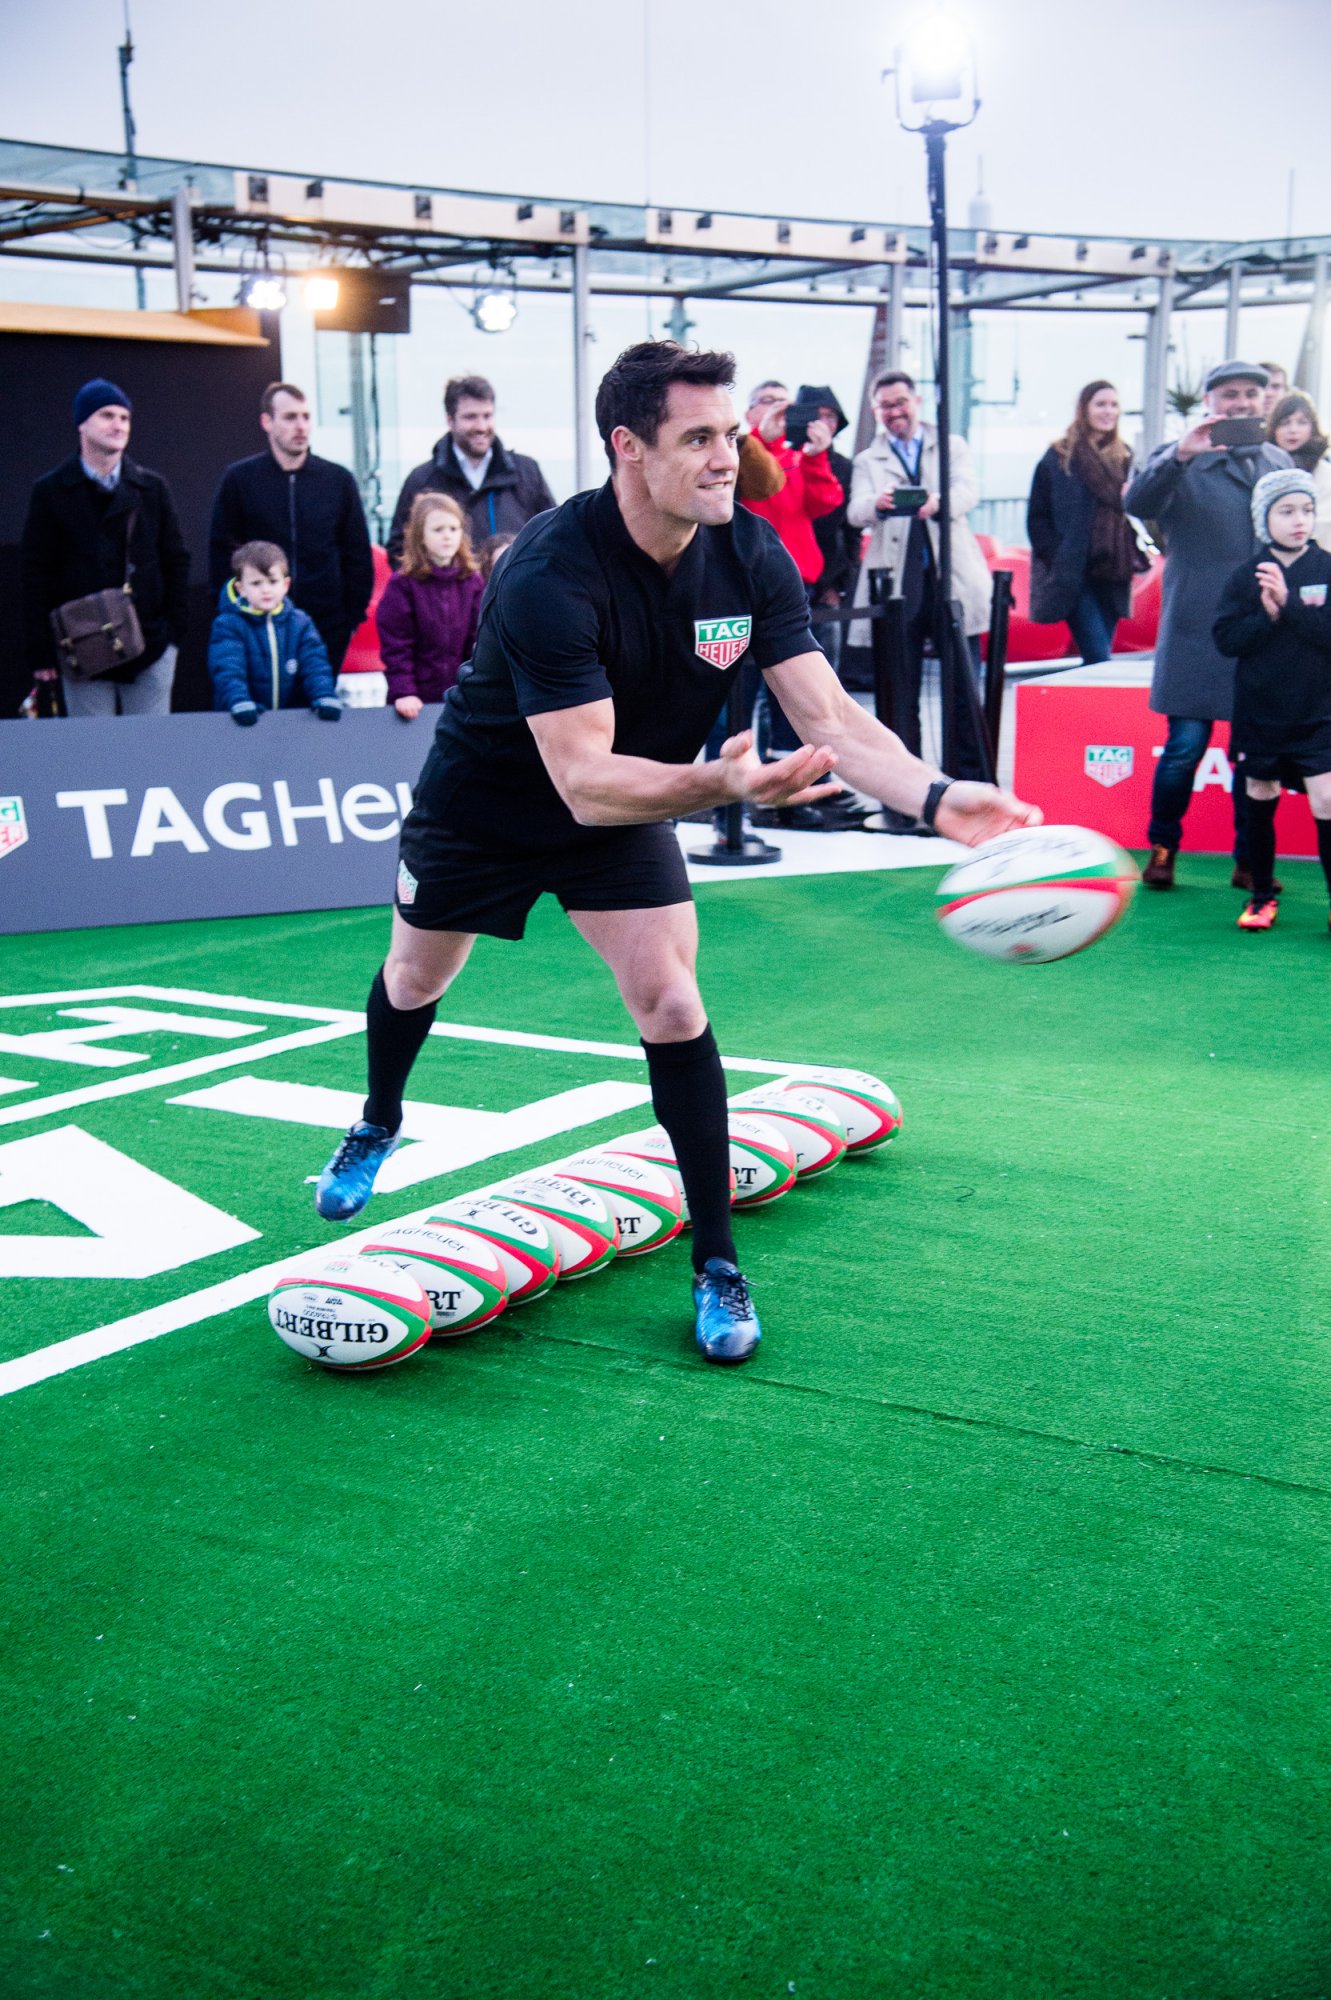 Kick off with Dan Carter! The famous rugby player joins the TAG Heuer  family